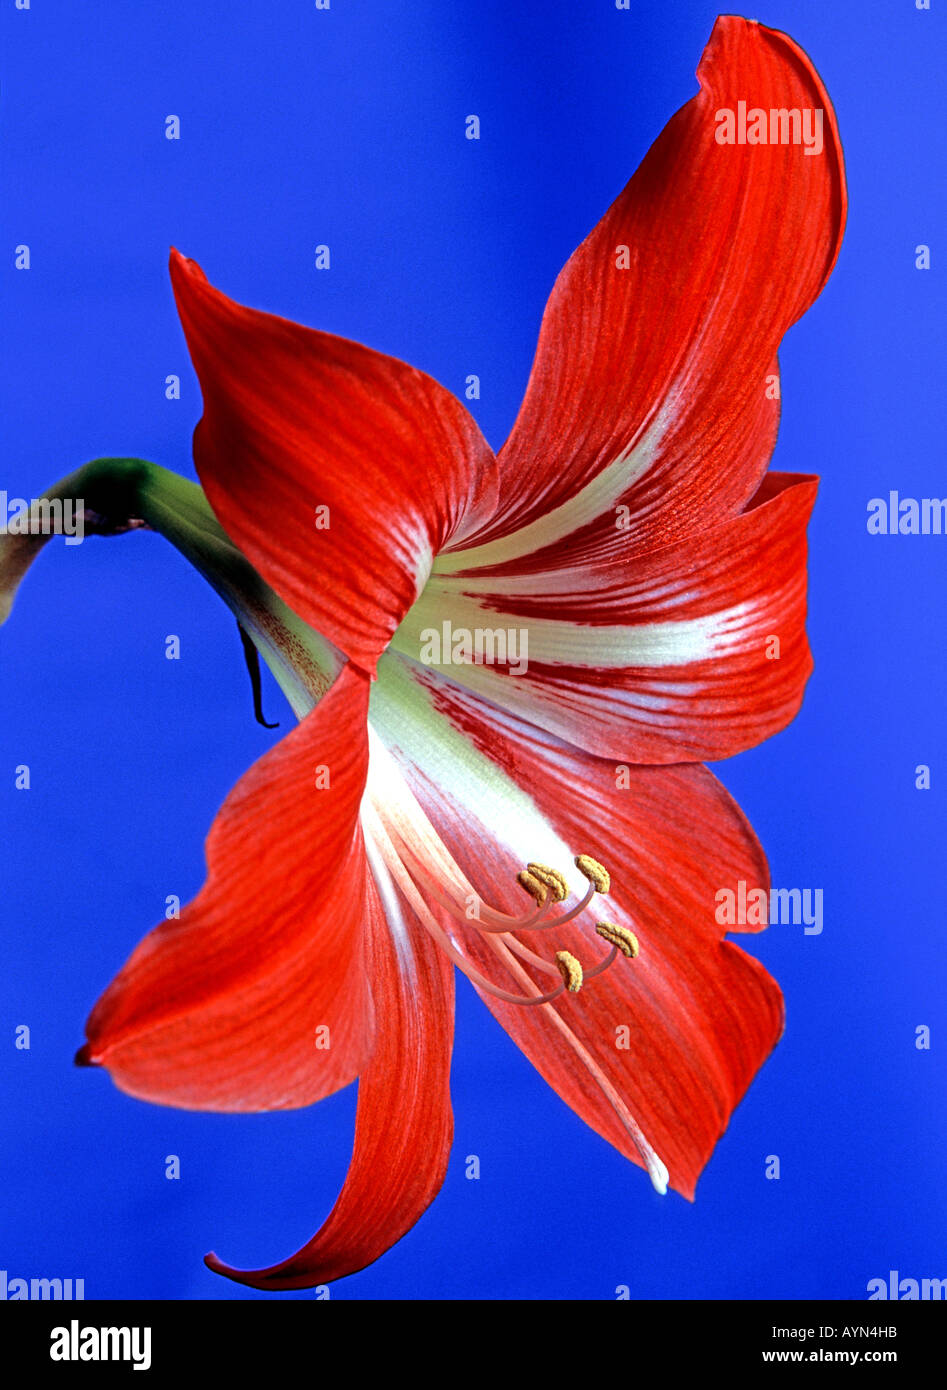 Red amarylis flower on the blue background Stock Photo